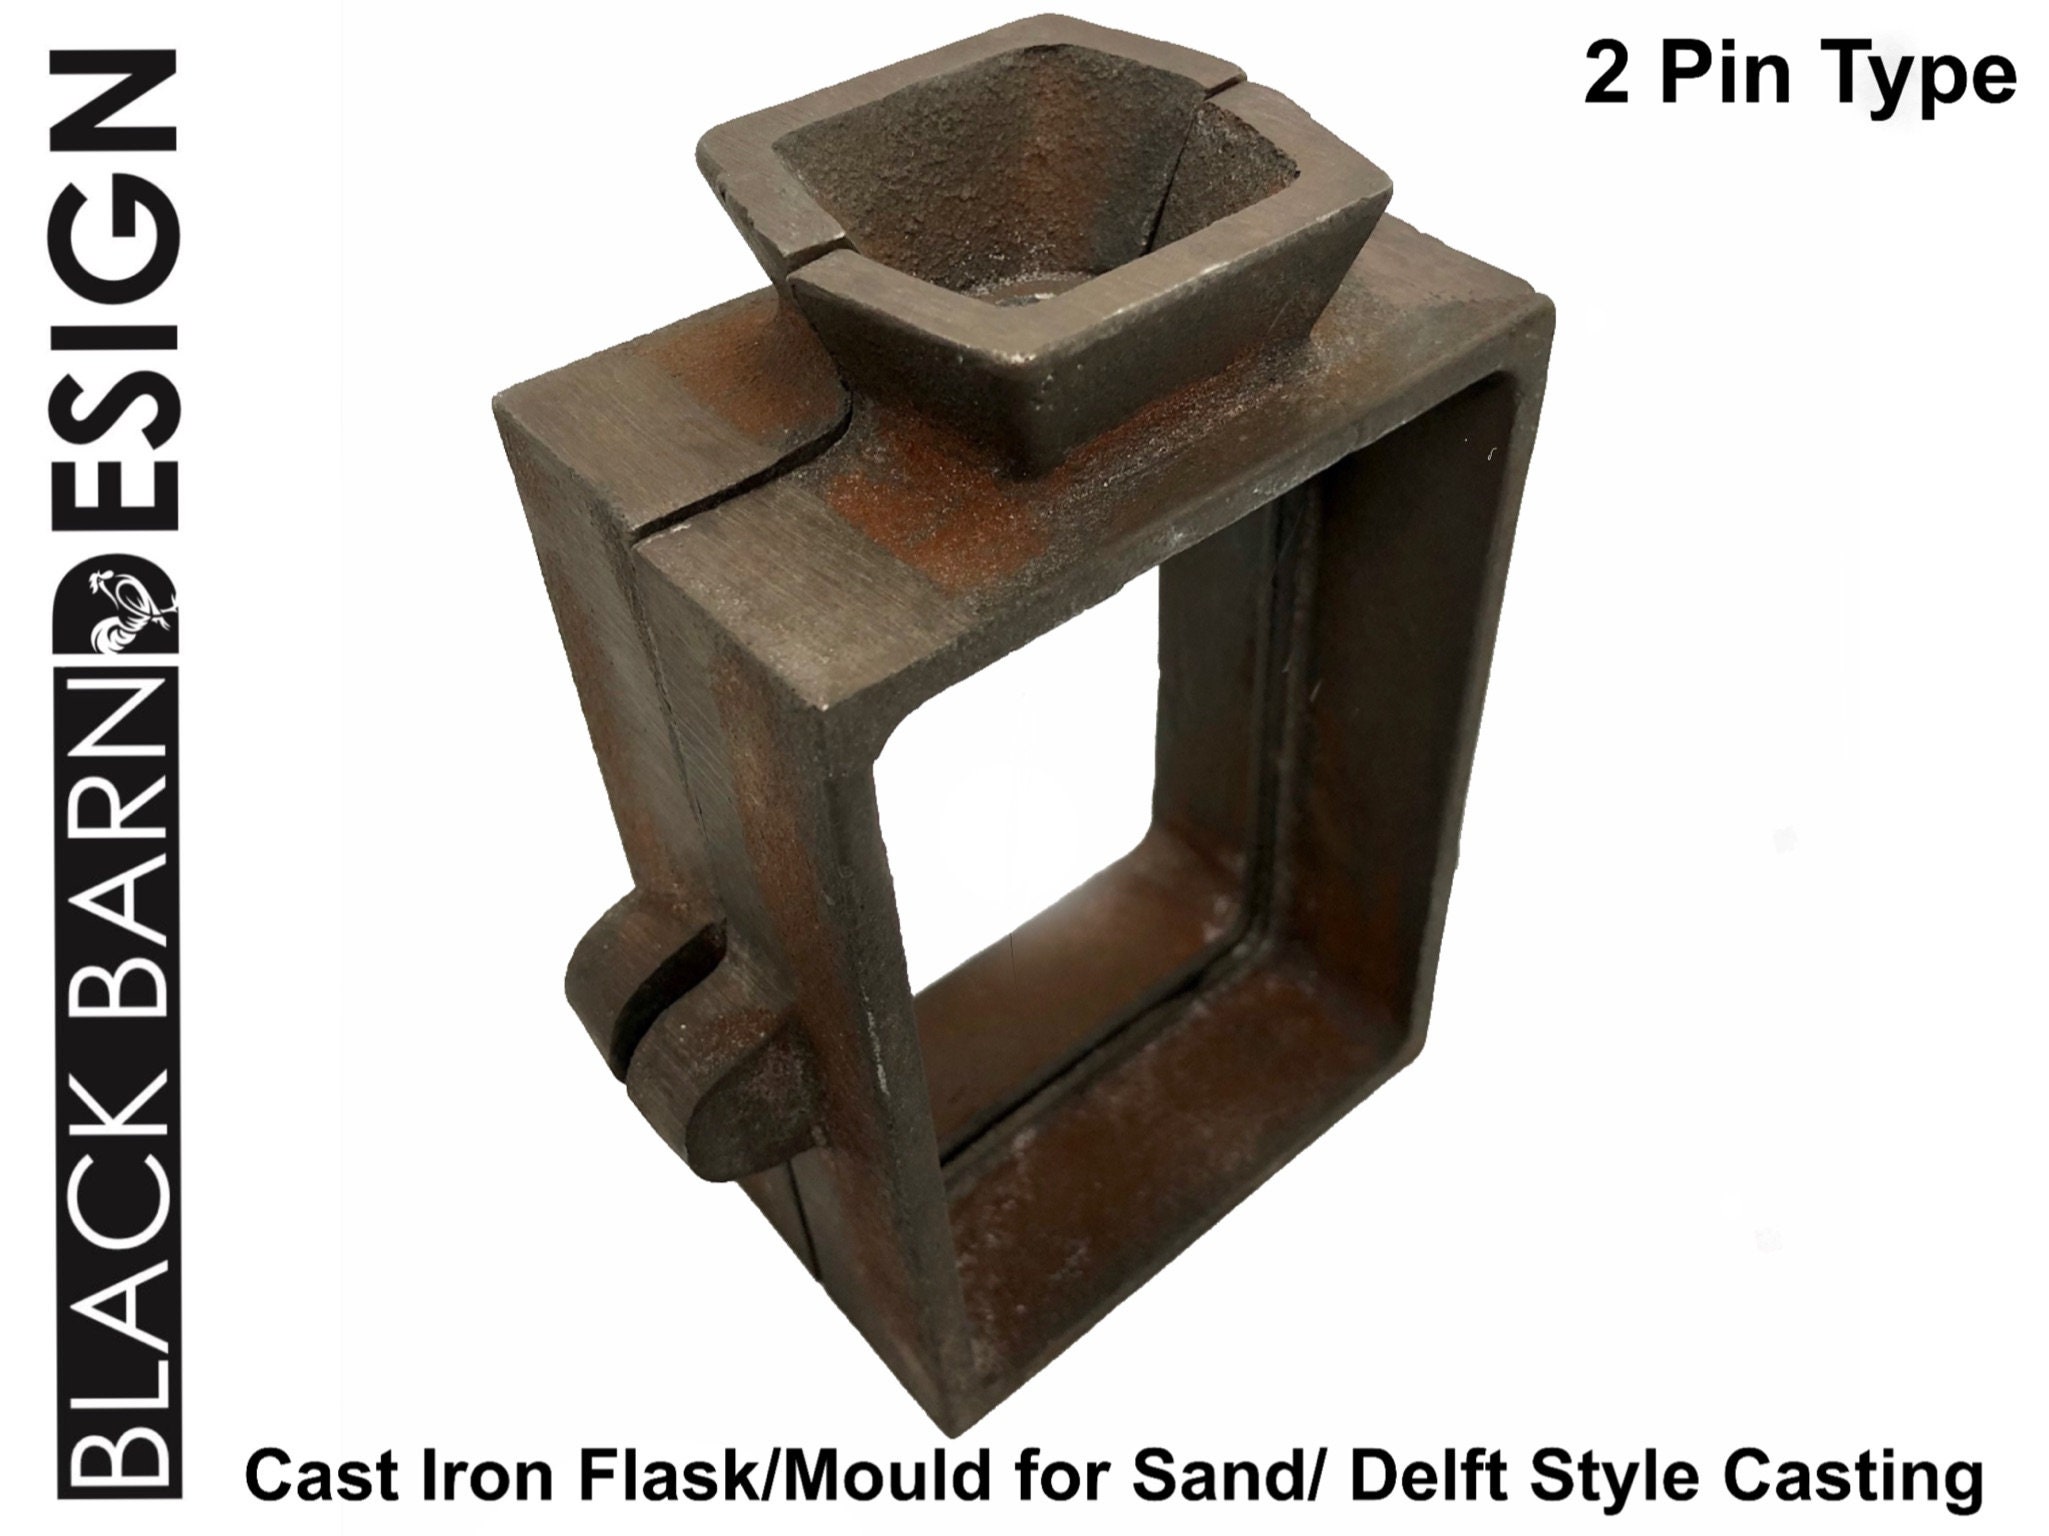 1 Kg of Petrobond Oil Bonded Metal Casting Sand delft Clay Style Casting 